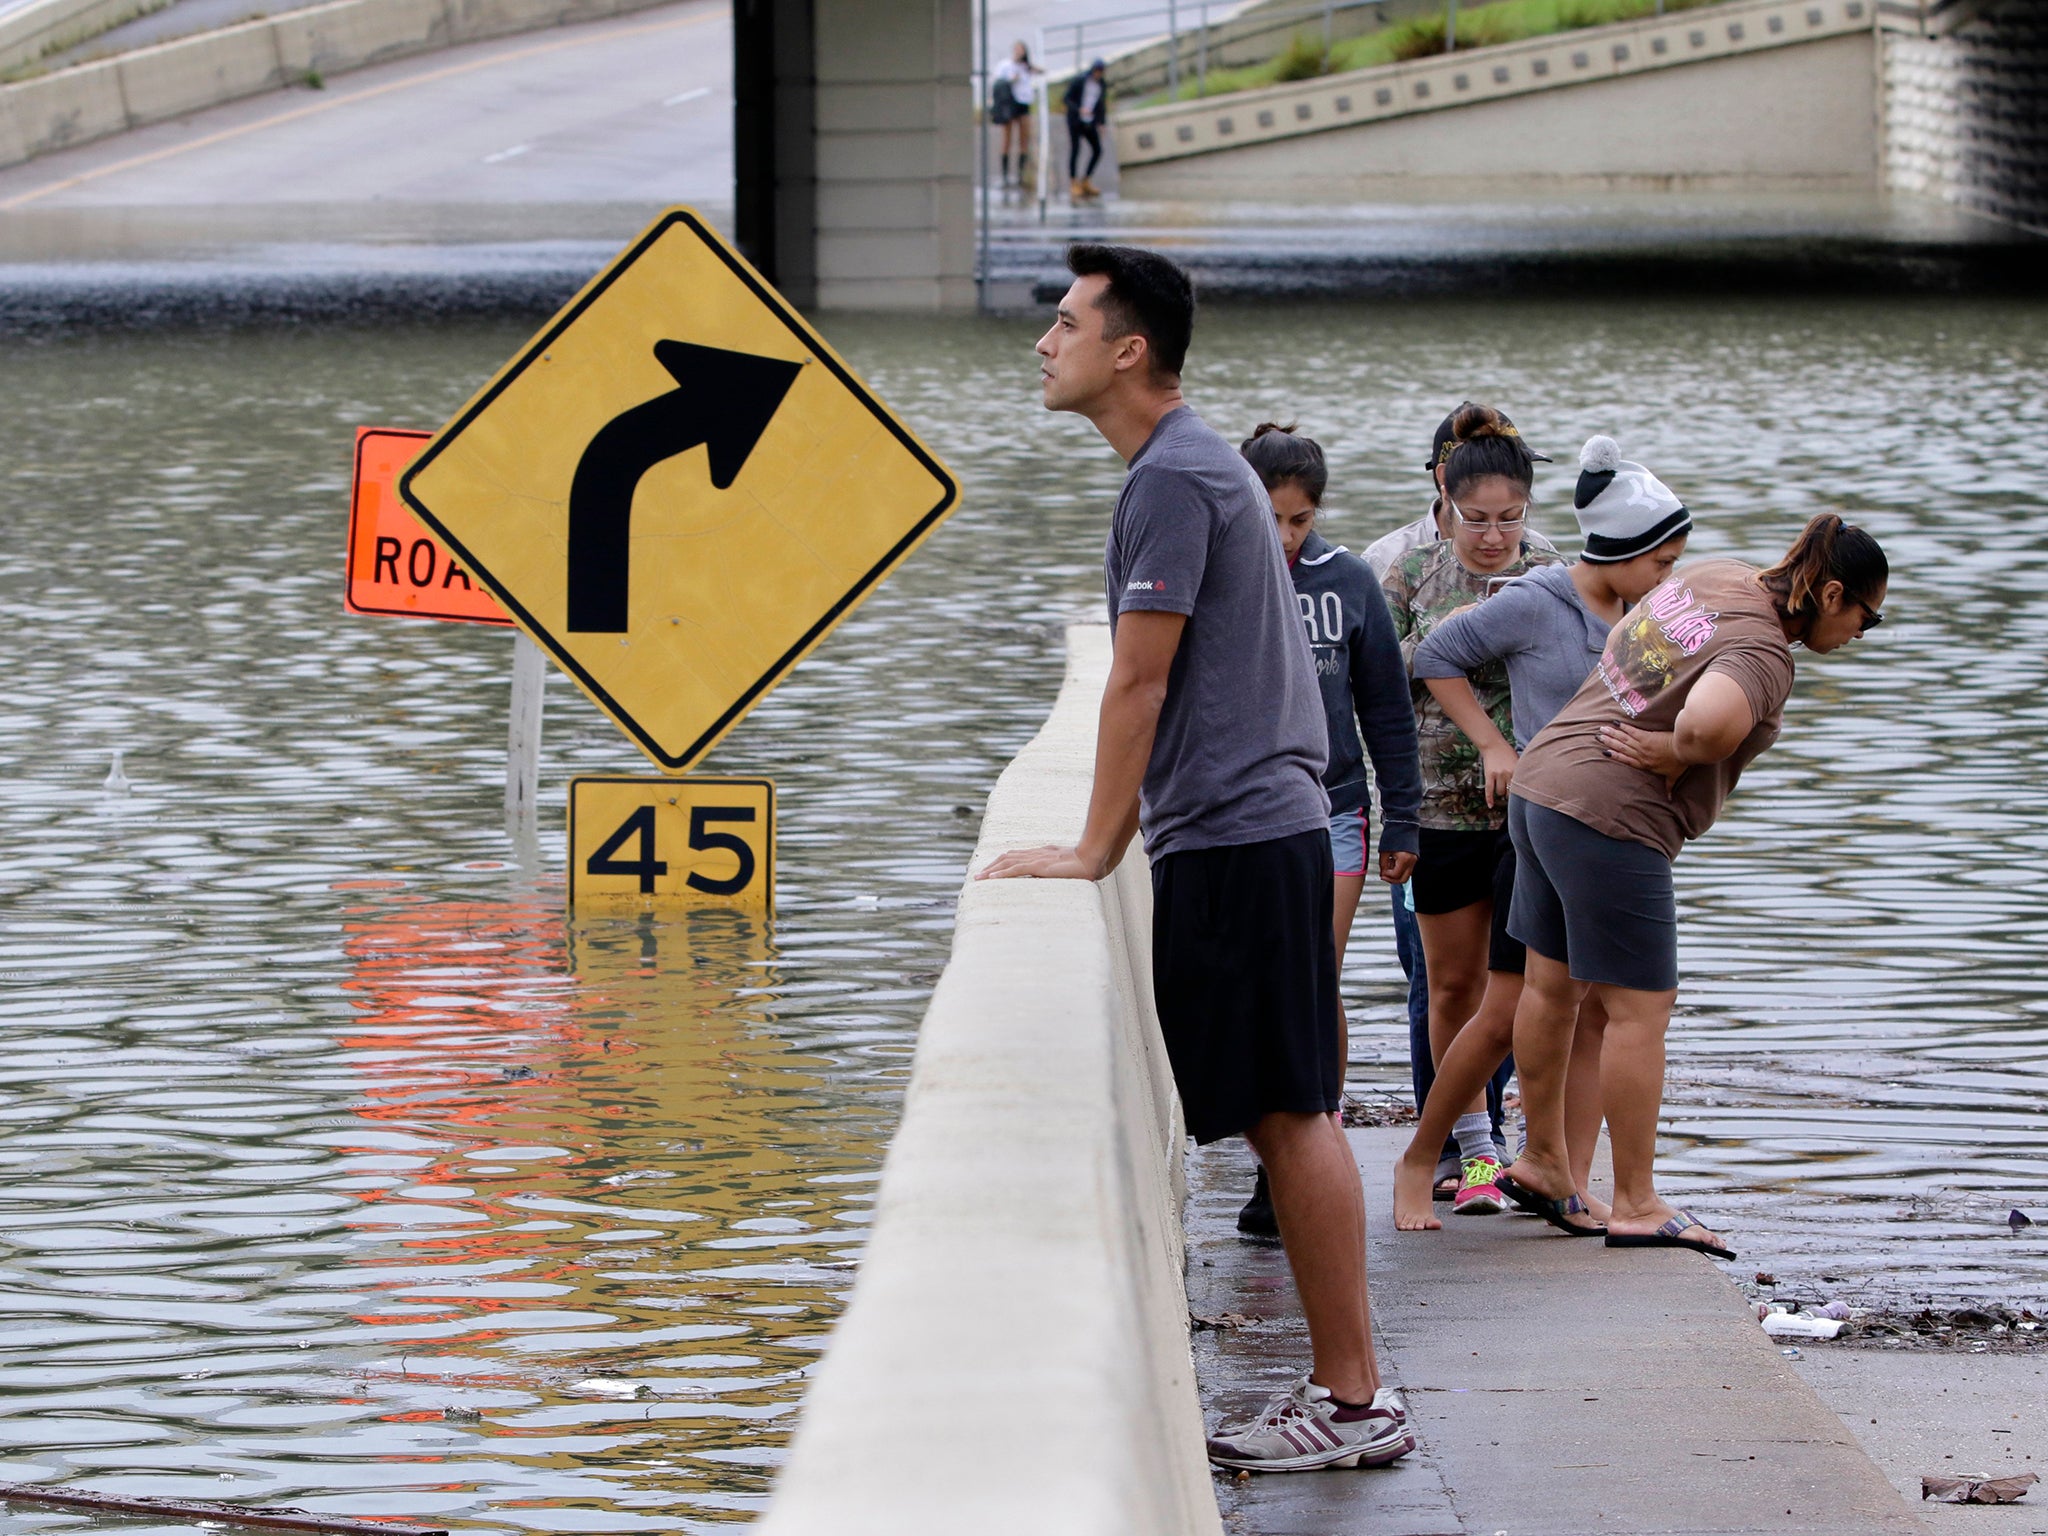 Houston has seen intense flooding, and many people have been forced into shelters